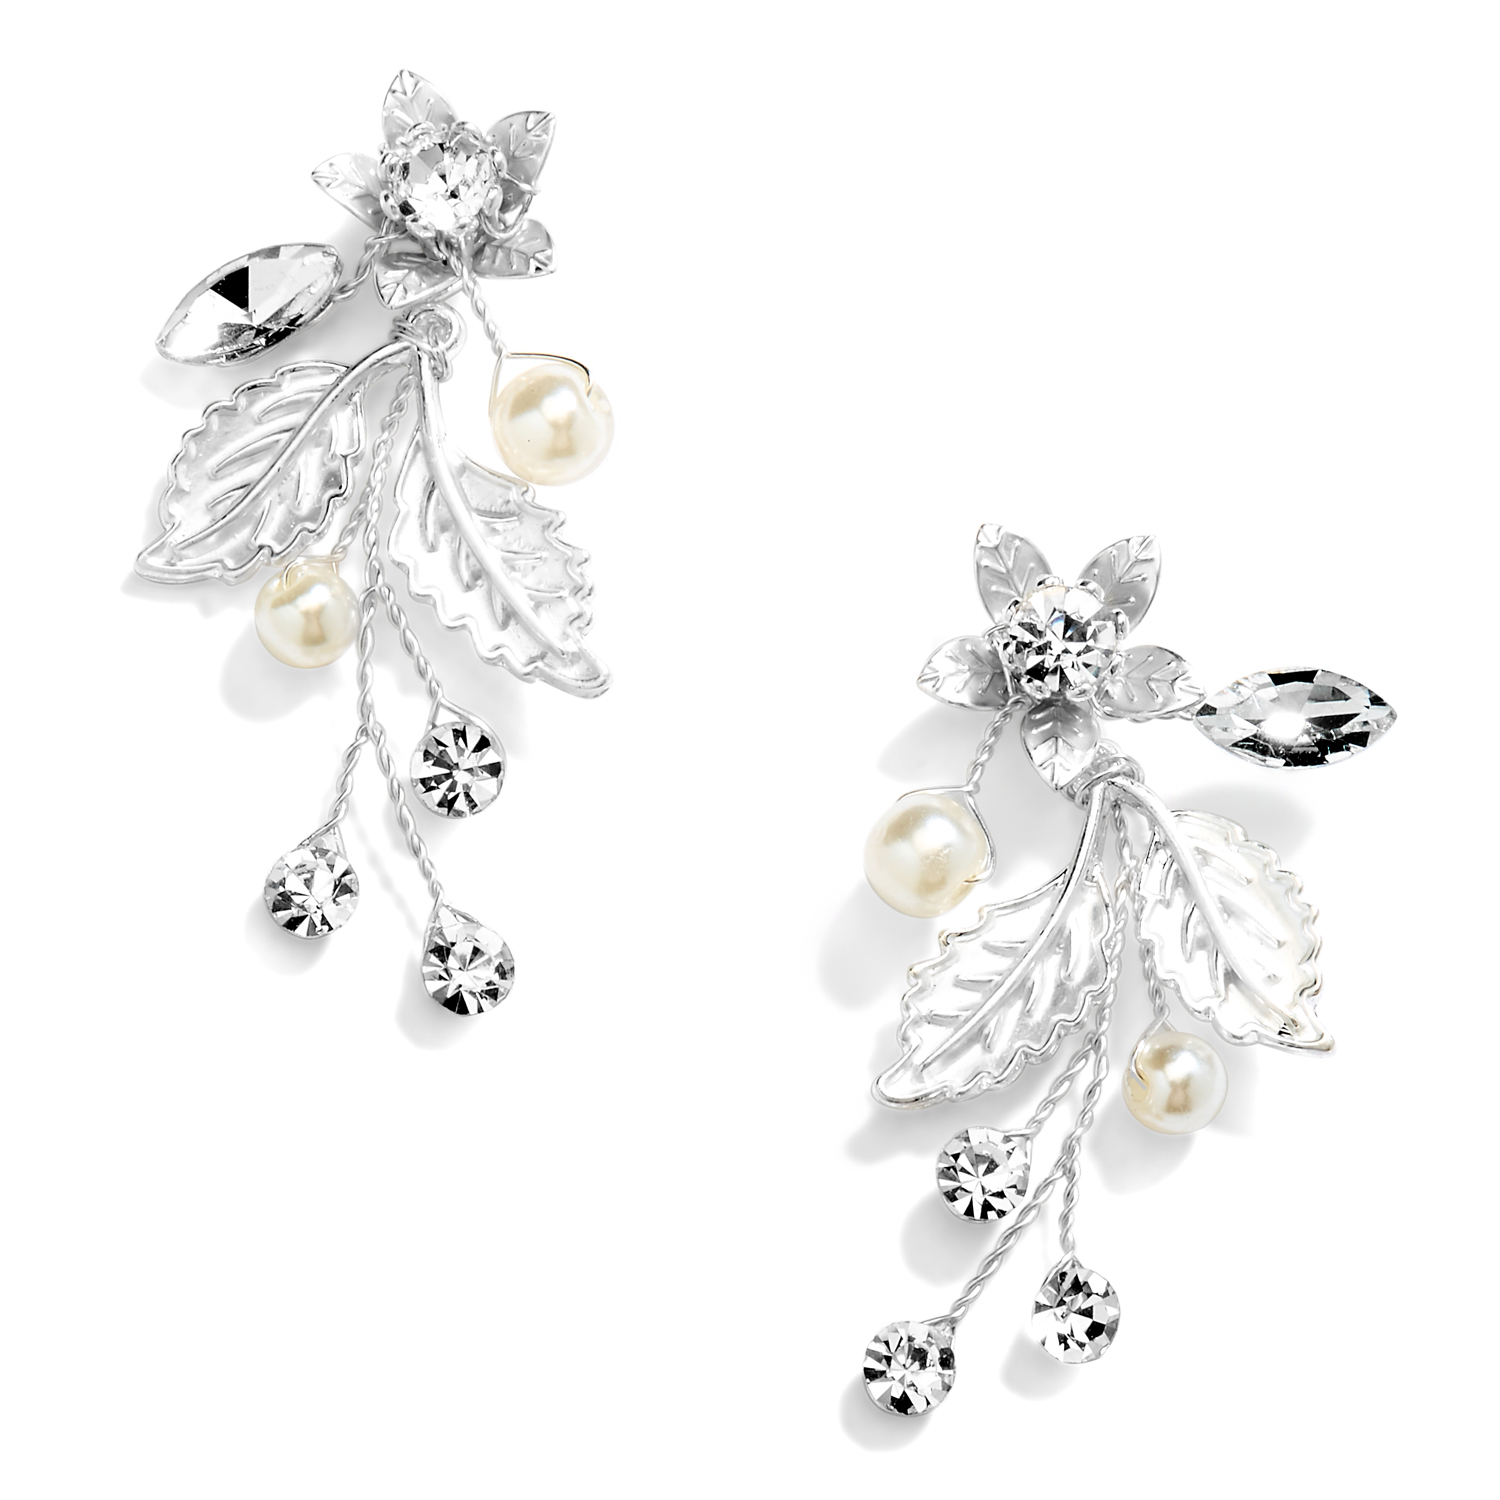 Handmade Floral Wedding Earrings with Austrian Crystals, Matte Silver Leaves and Ivory Pearls<br>4598E-S